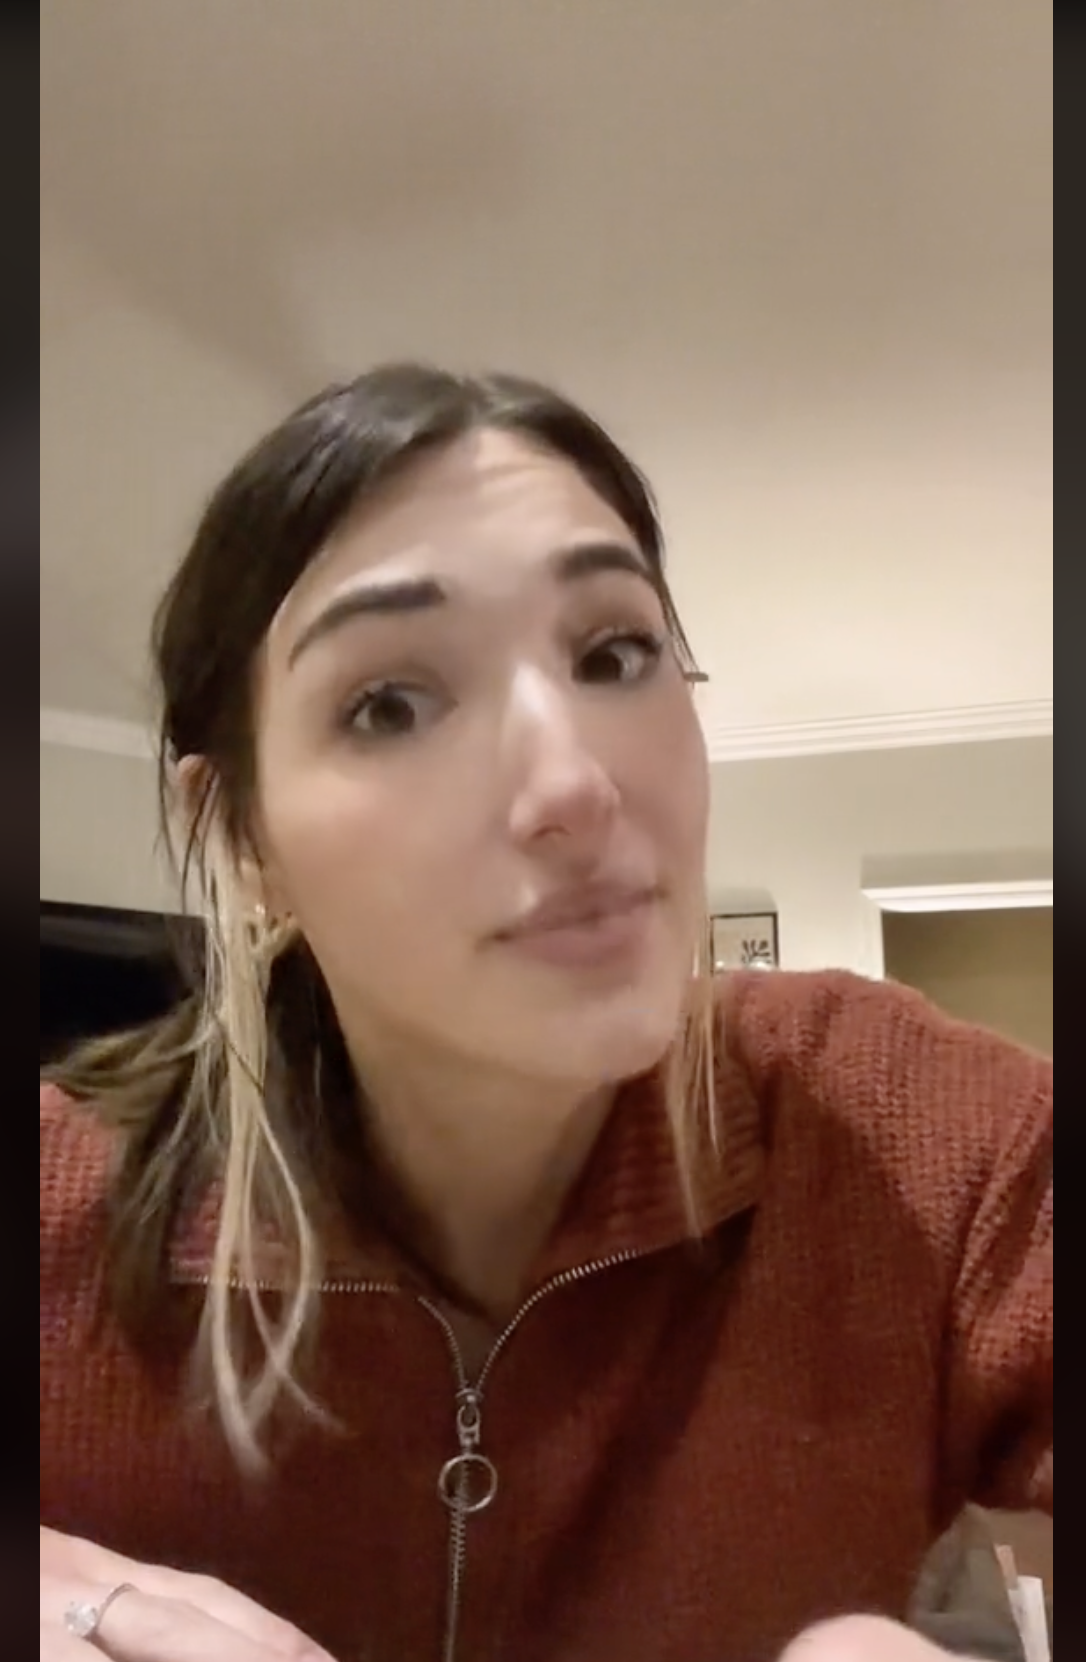 Alaina explaining why her grandma left everything to her in her will, as seen in a video dated December 2, 2022 | Source: TikTok/alaina_plzz